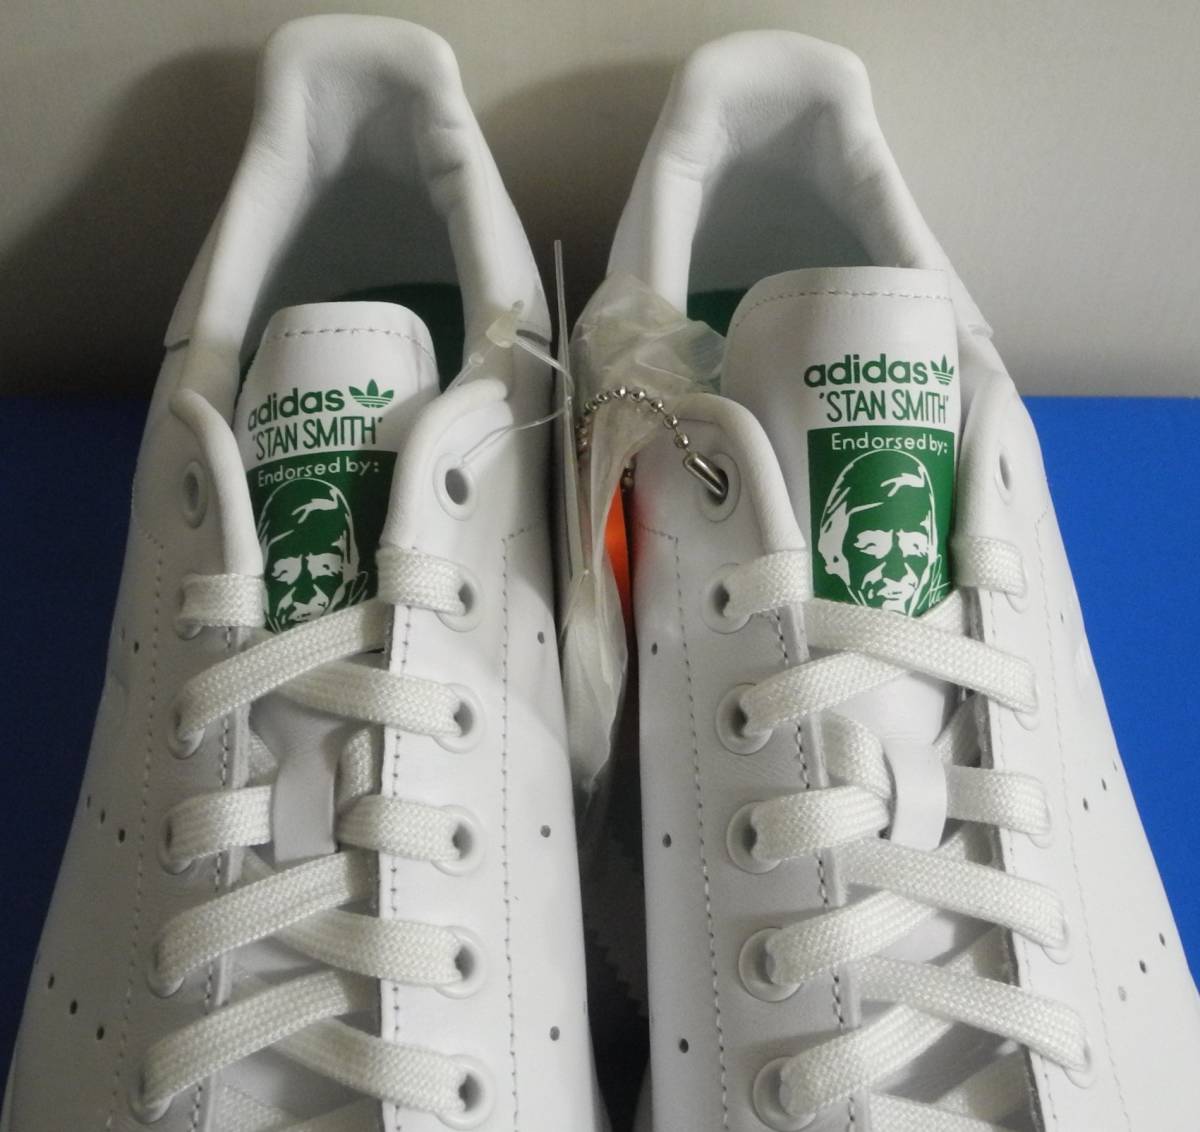  almost new goods Stansmith BEAMS 2016 year made JP26.5cm BB0464 natural leather production end limitated model collaboration adidas stansmith Beams special order white white 